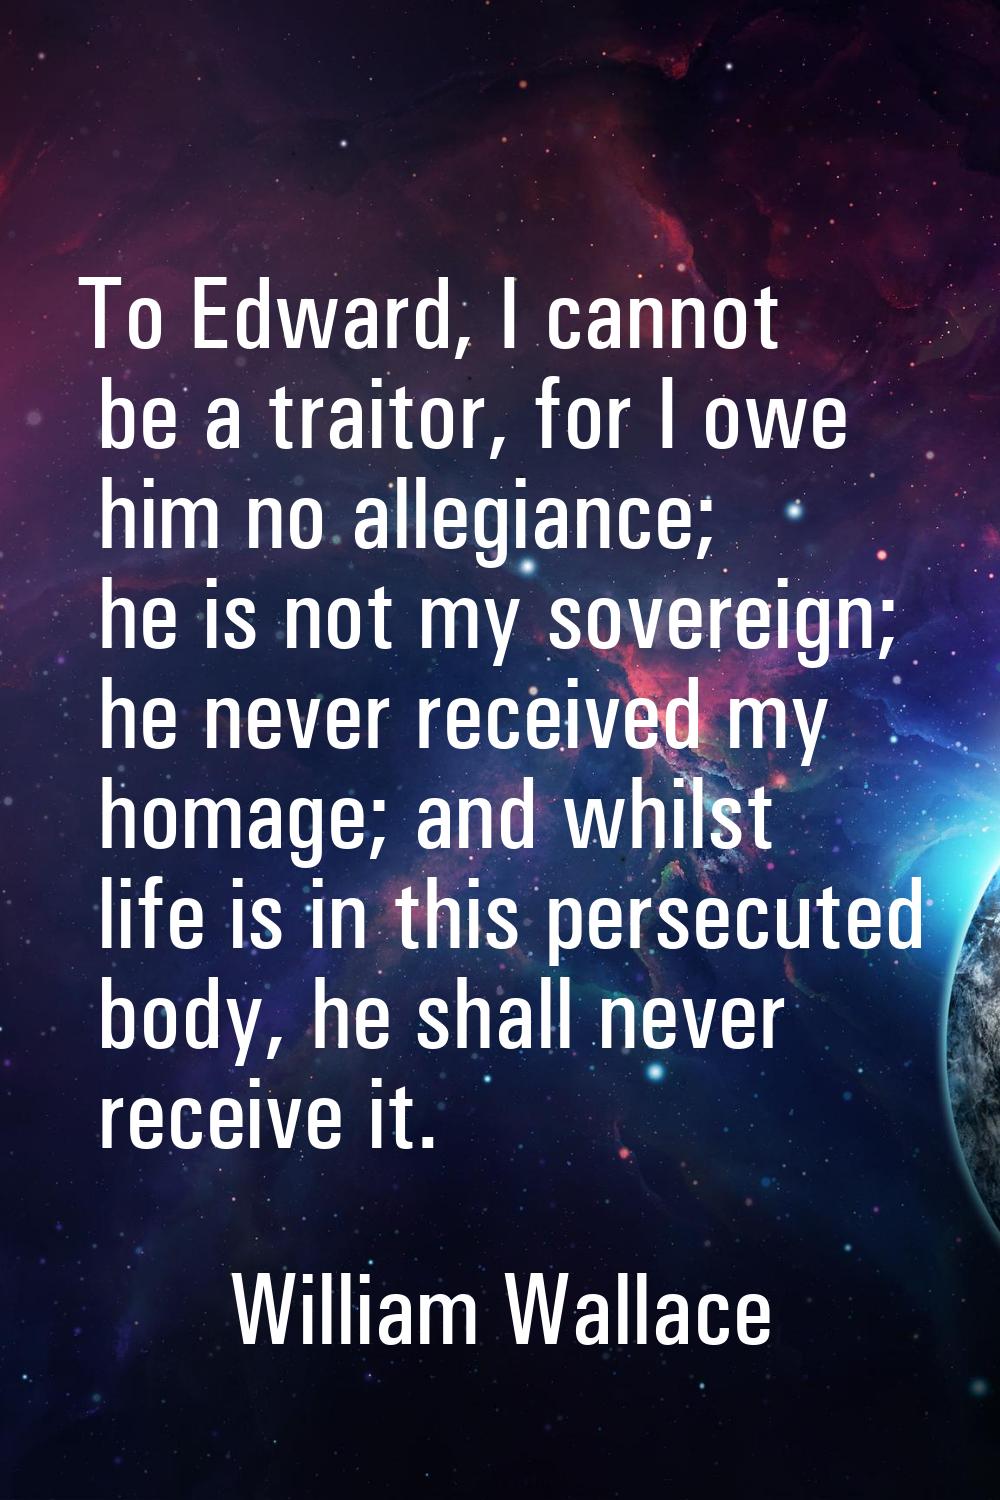 To Edward, I cannot be a traitor, for I owe him no allegiance; he is not my sovereign; he never rec